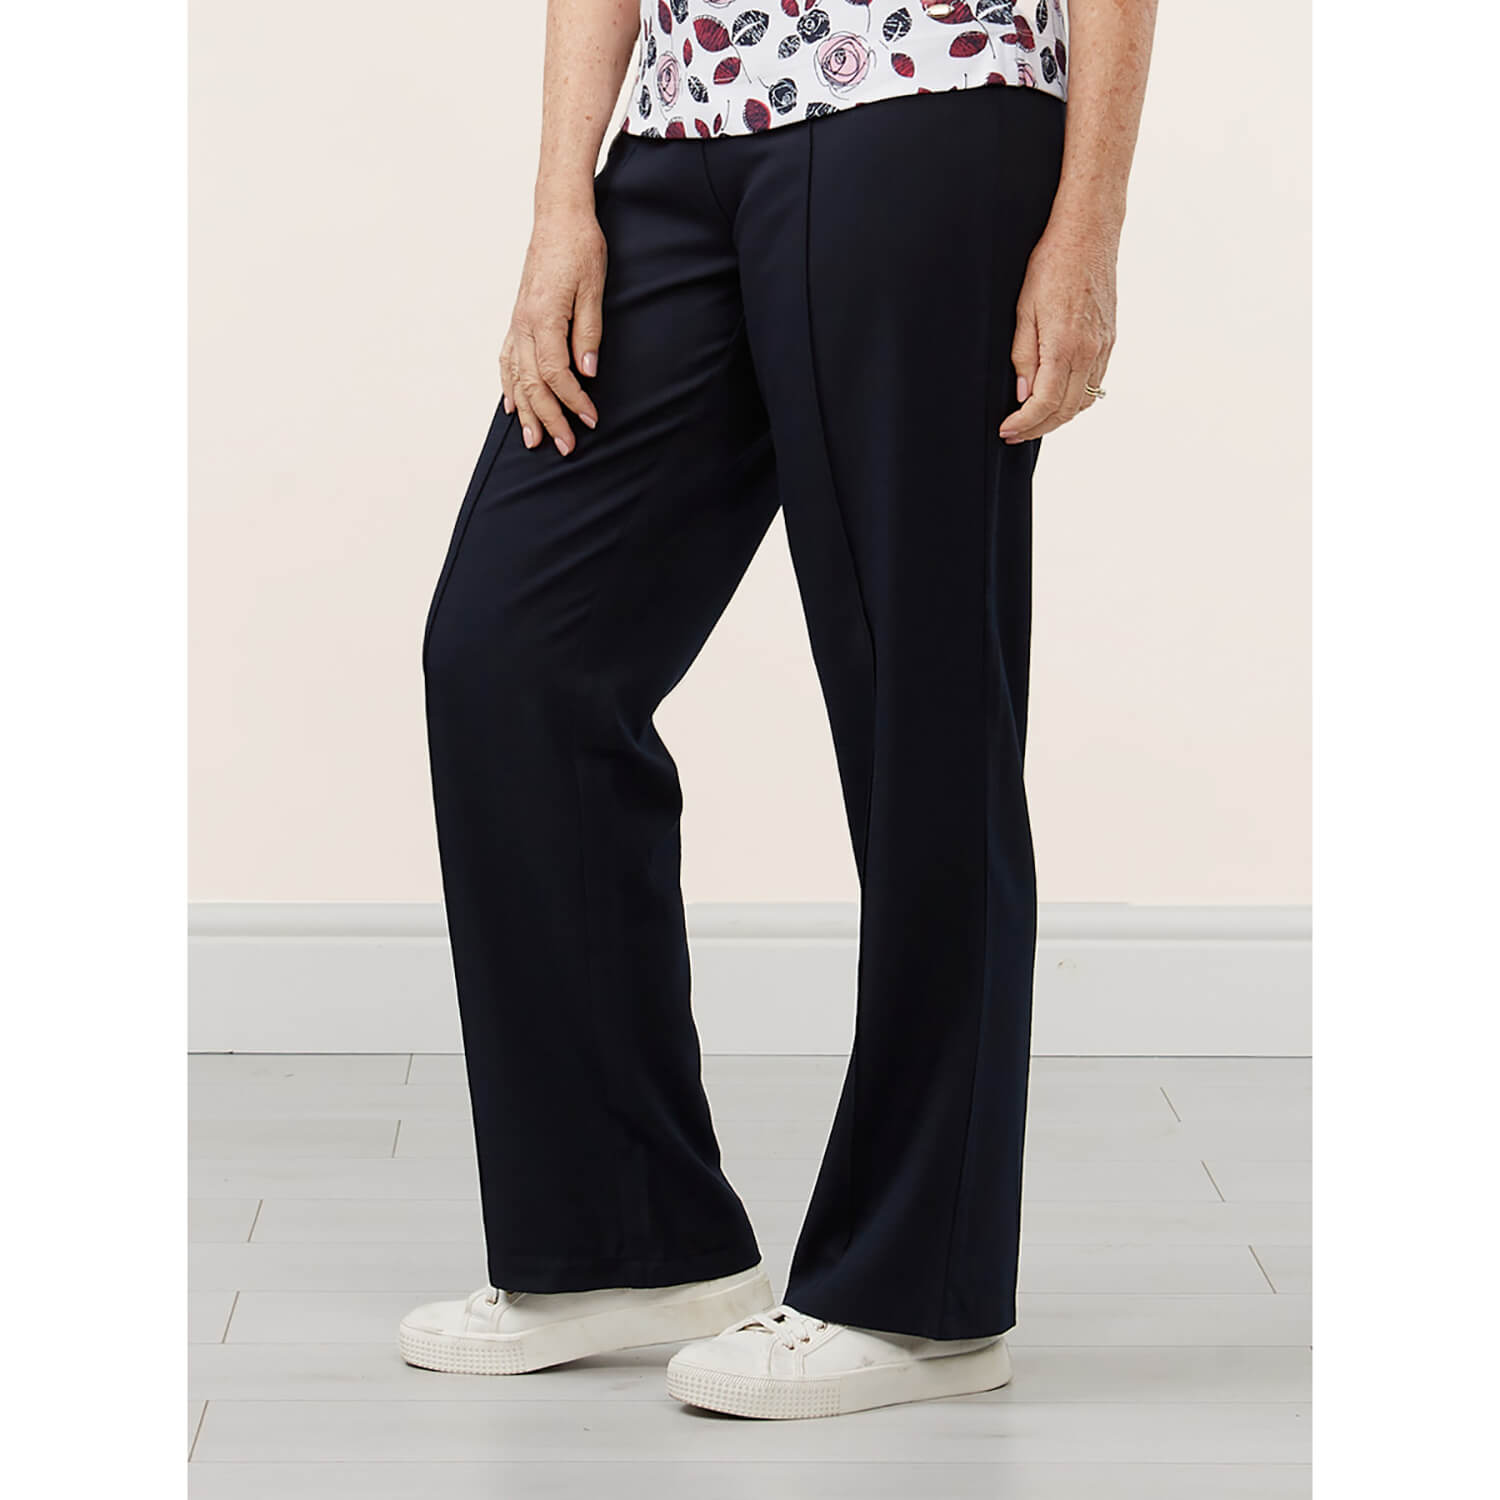 Tigiwear Jersey Light Weight Trousers - Navy 1 Shaws Department Stores